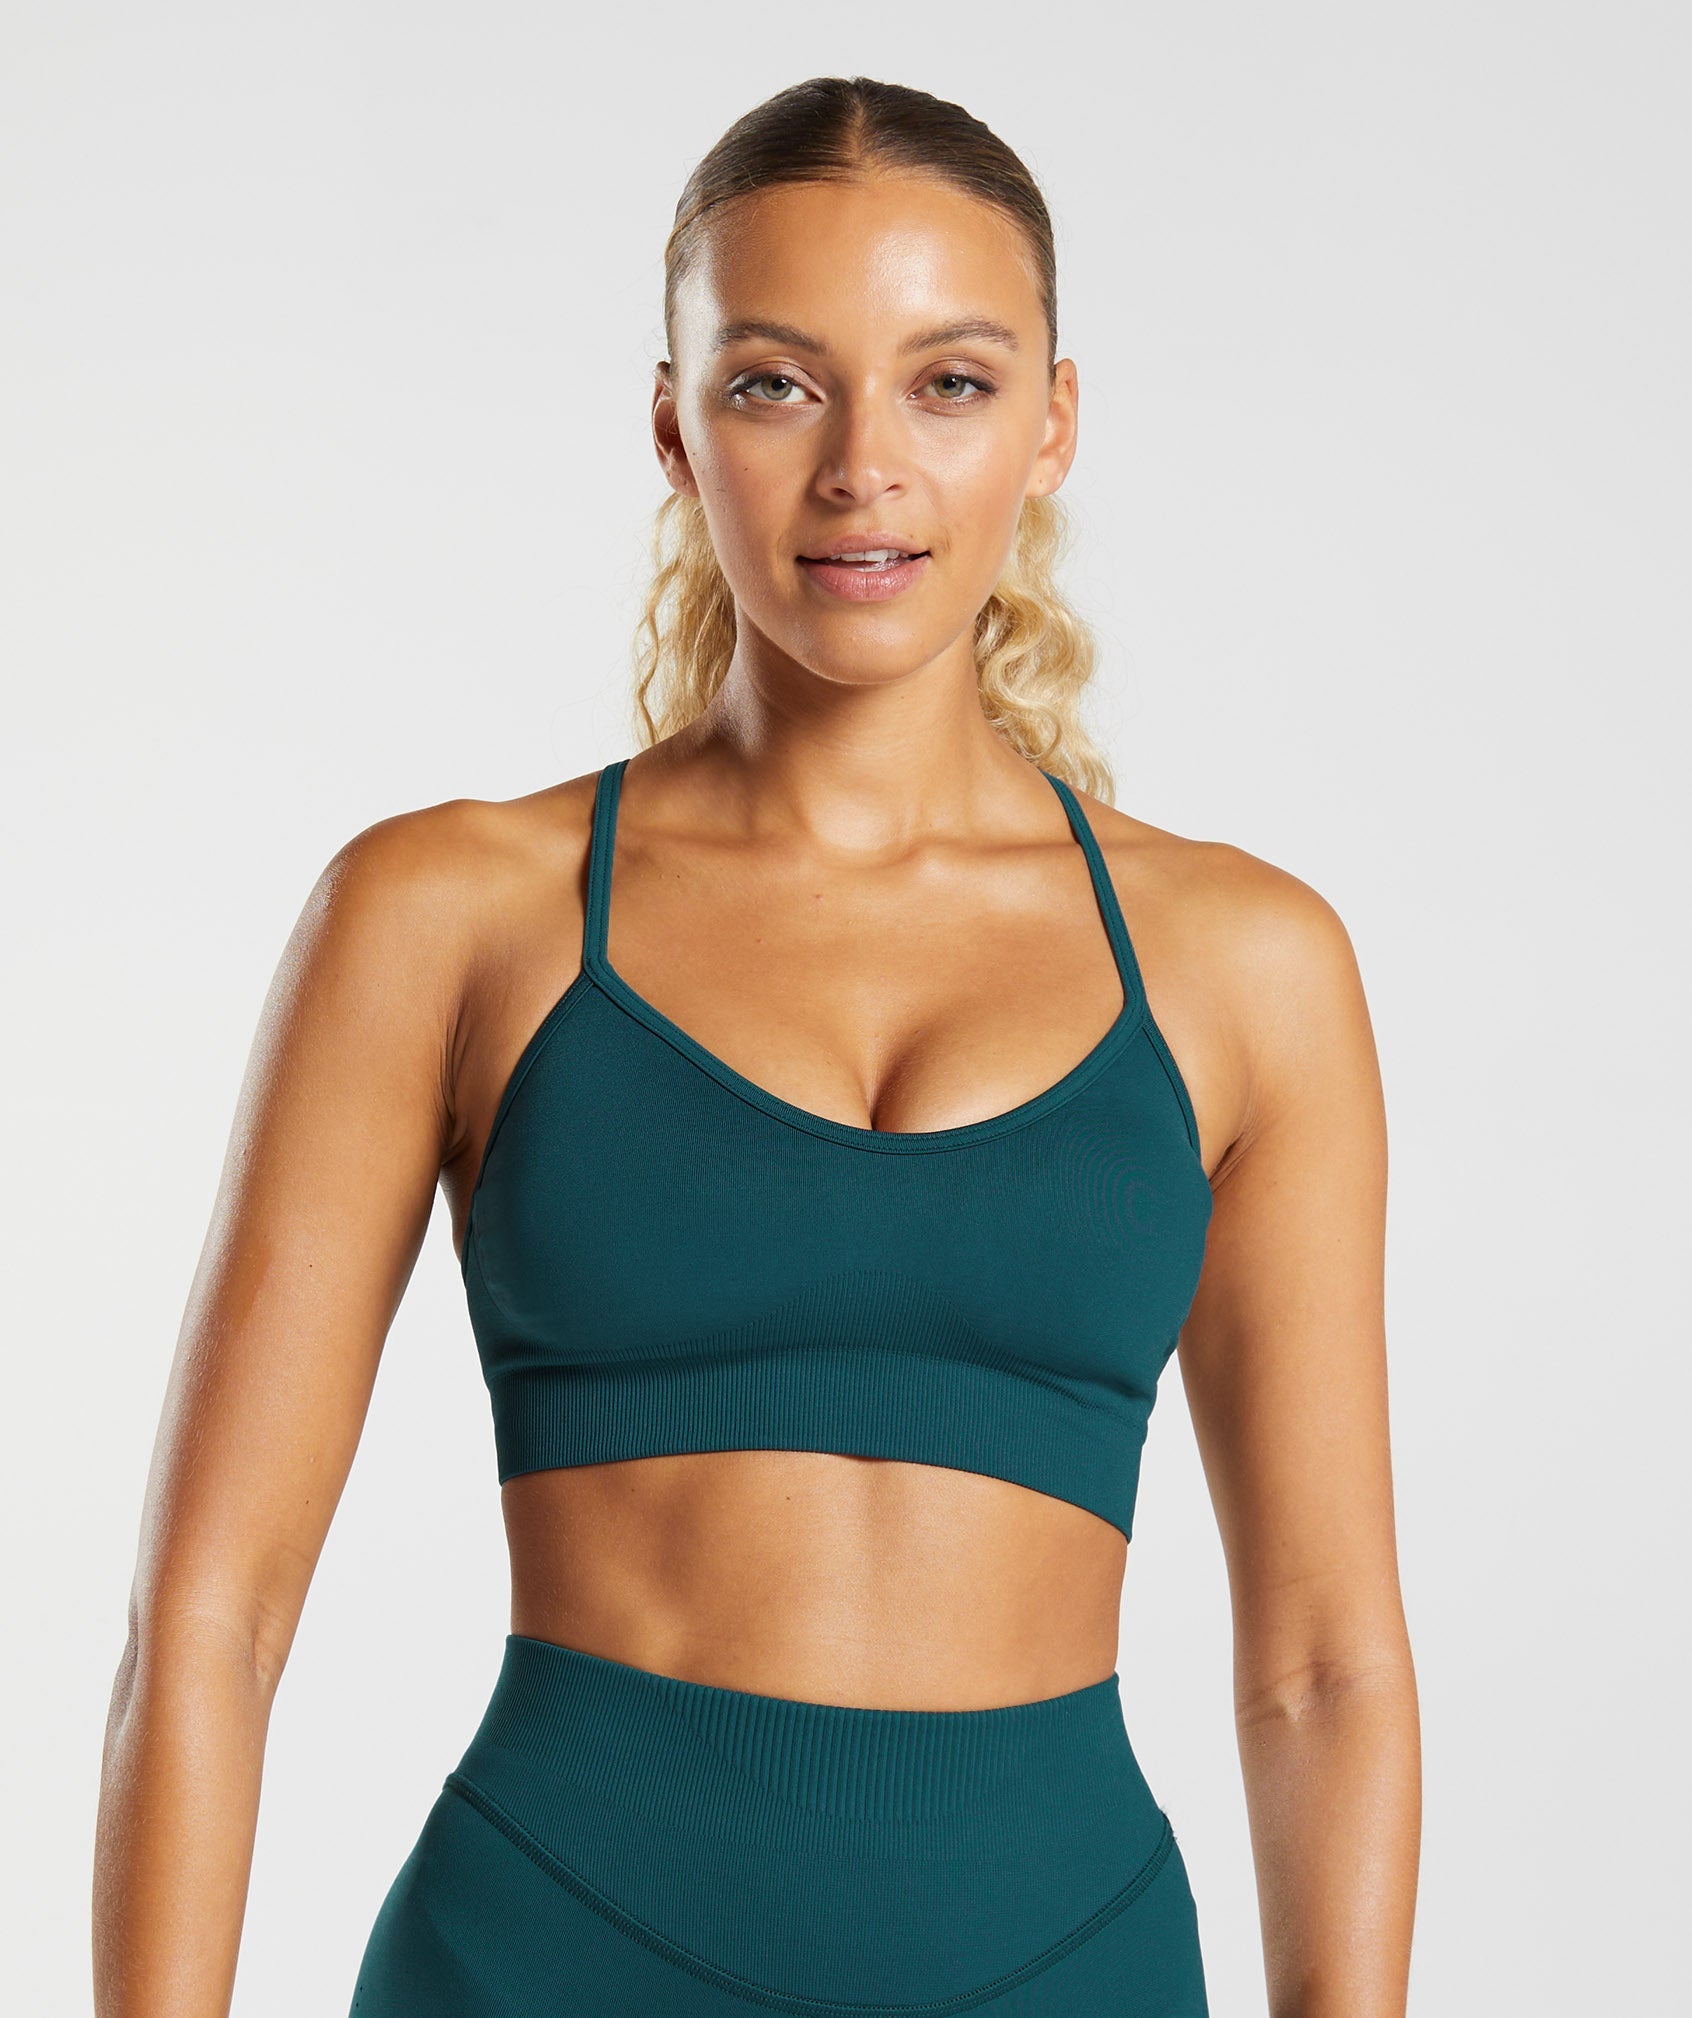 Sweat Seamless Sports Bra in {{variantColor} is out of stock